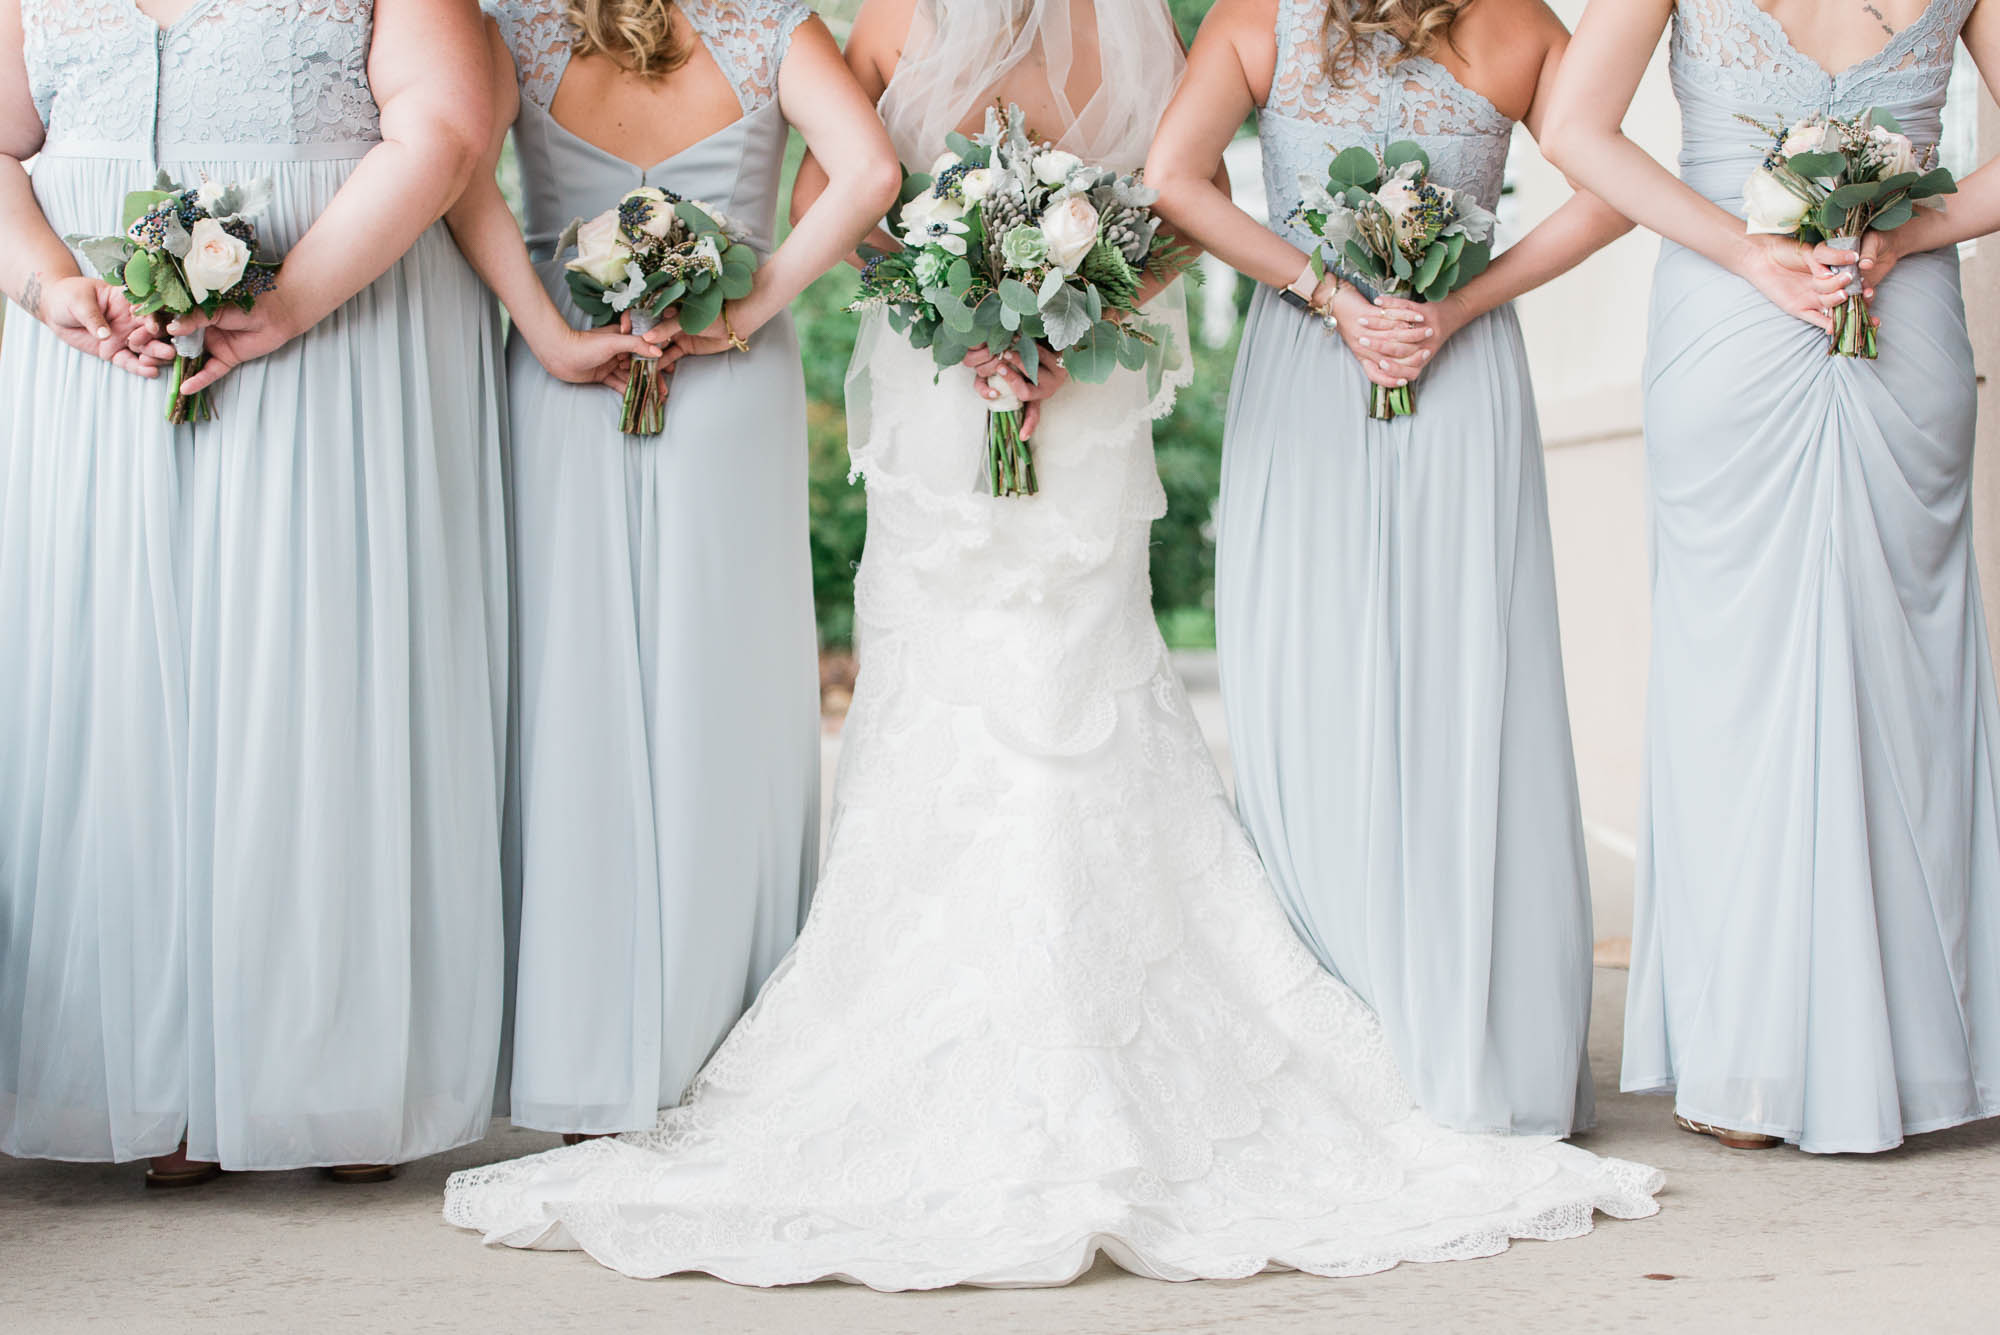 South Valley Park Bridal Party Photography